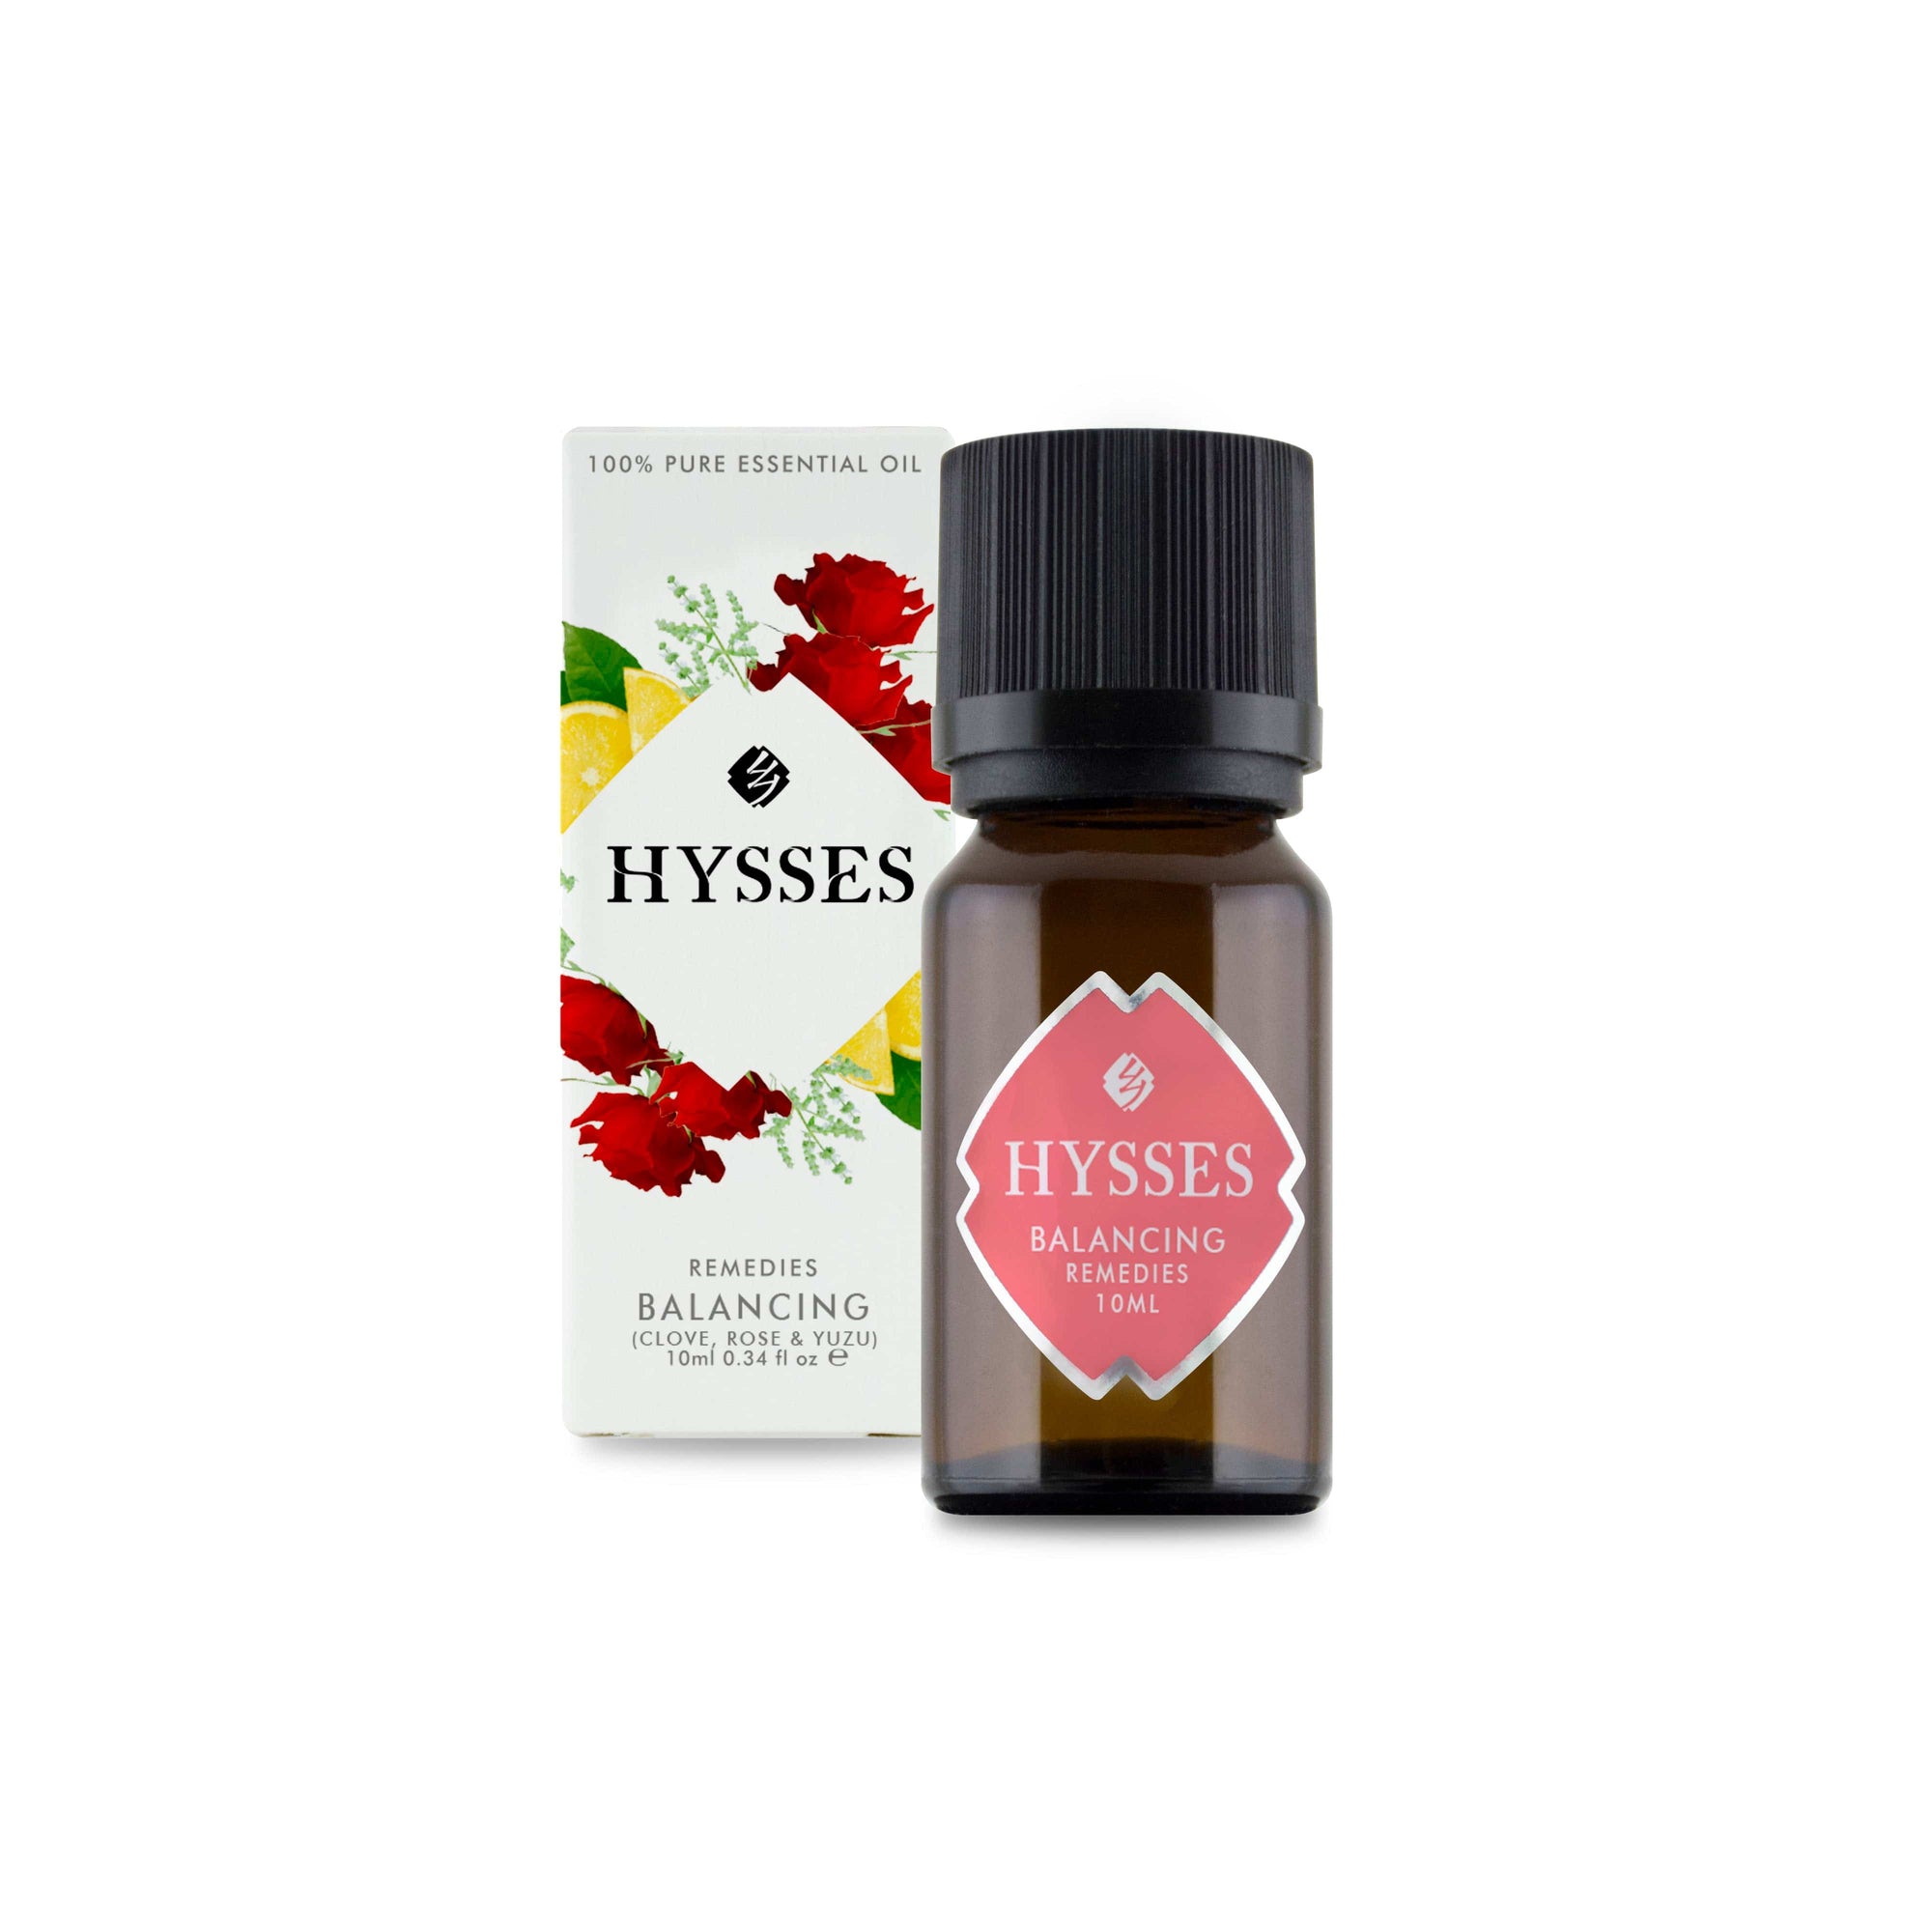 Hysses Essential Oil Remedies, Balancing